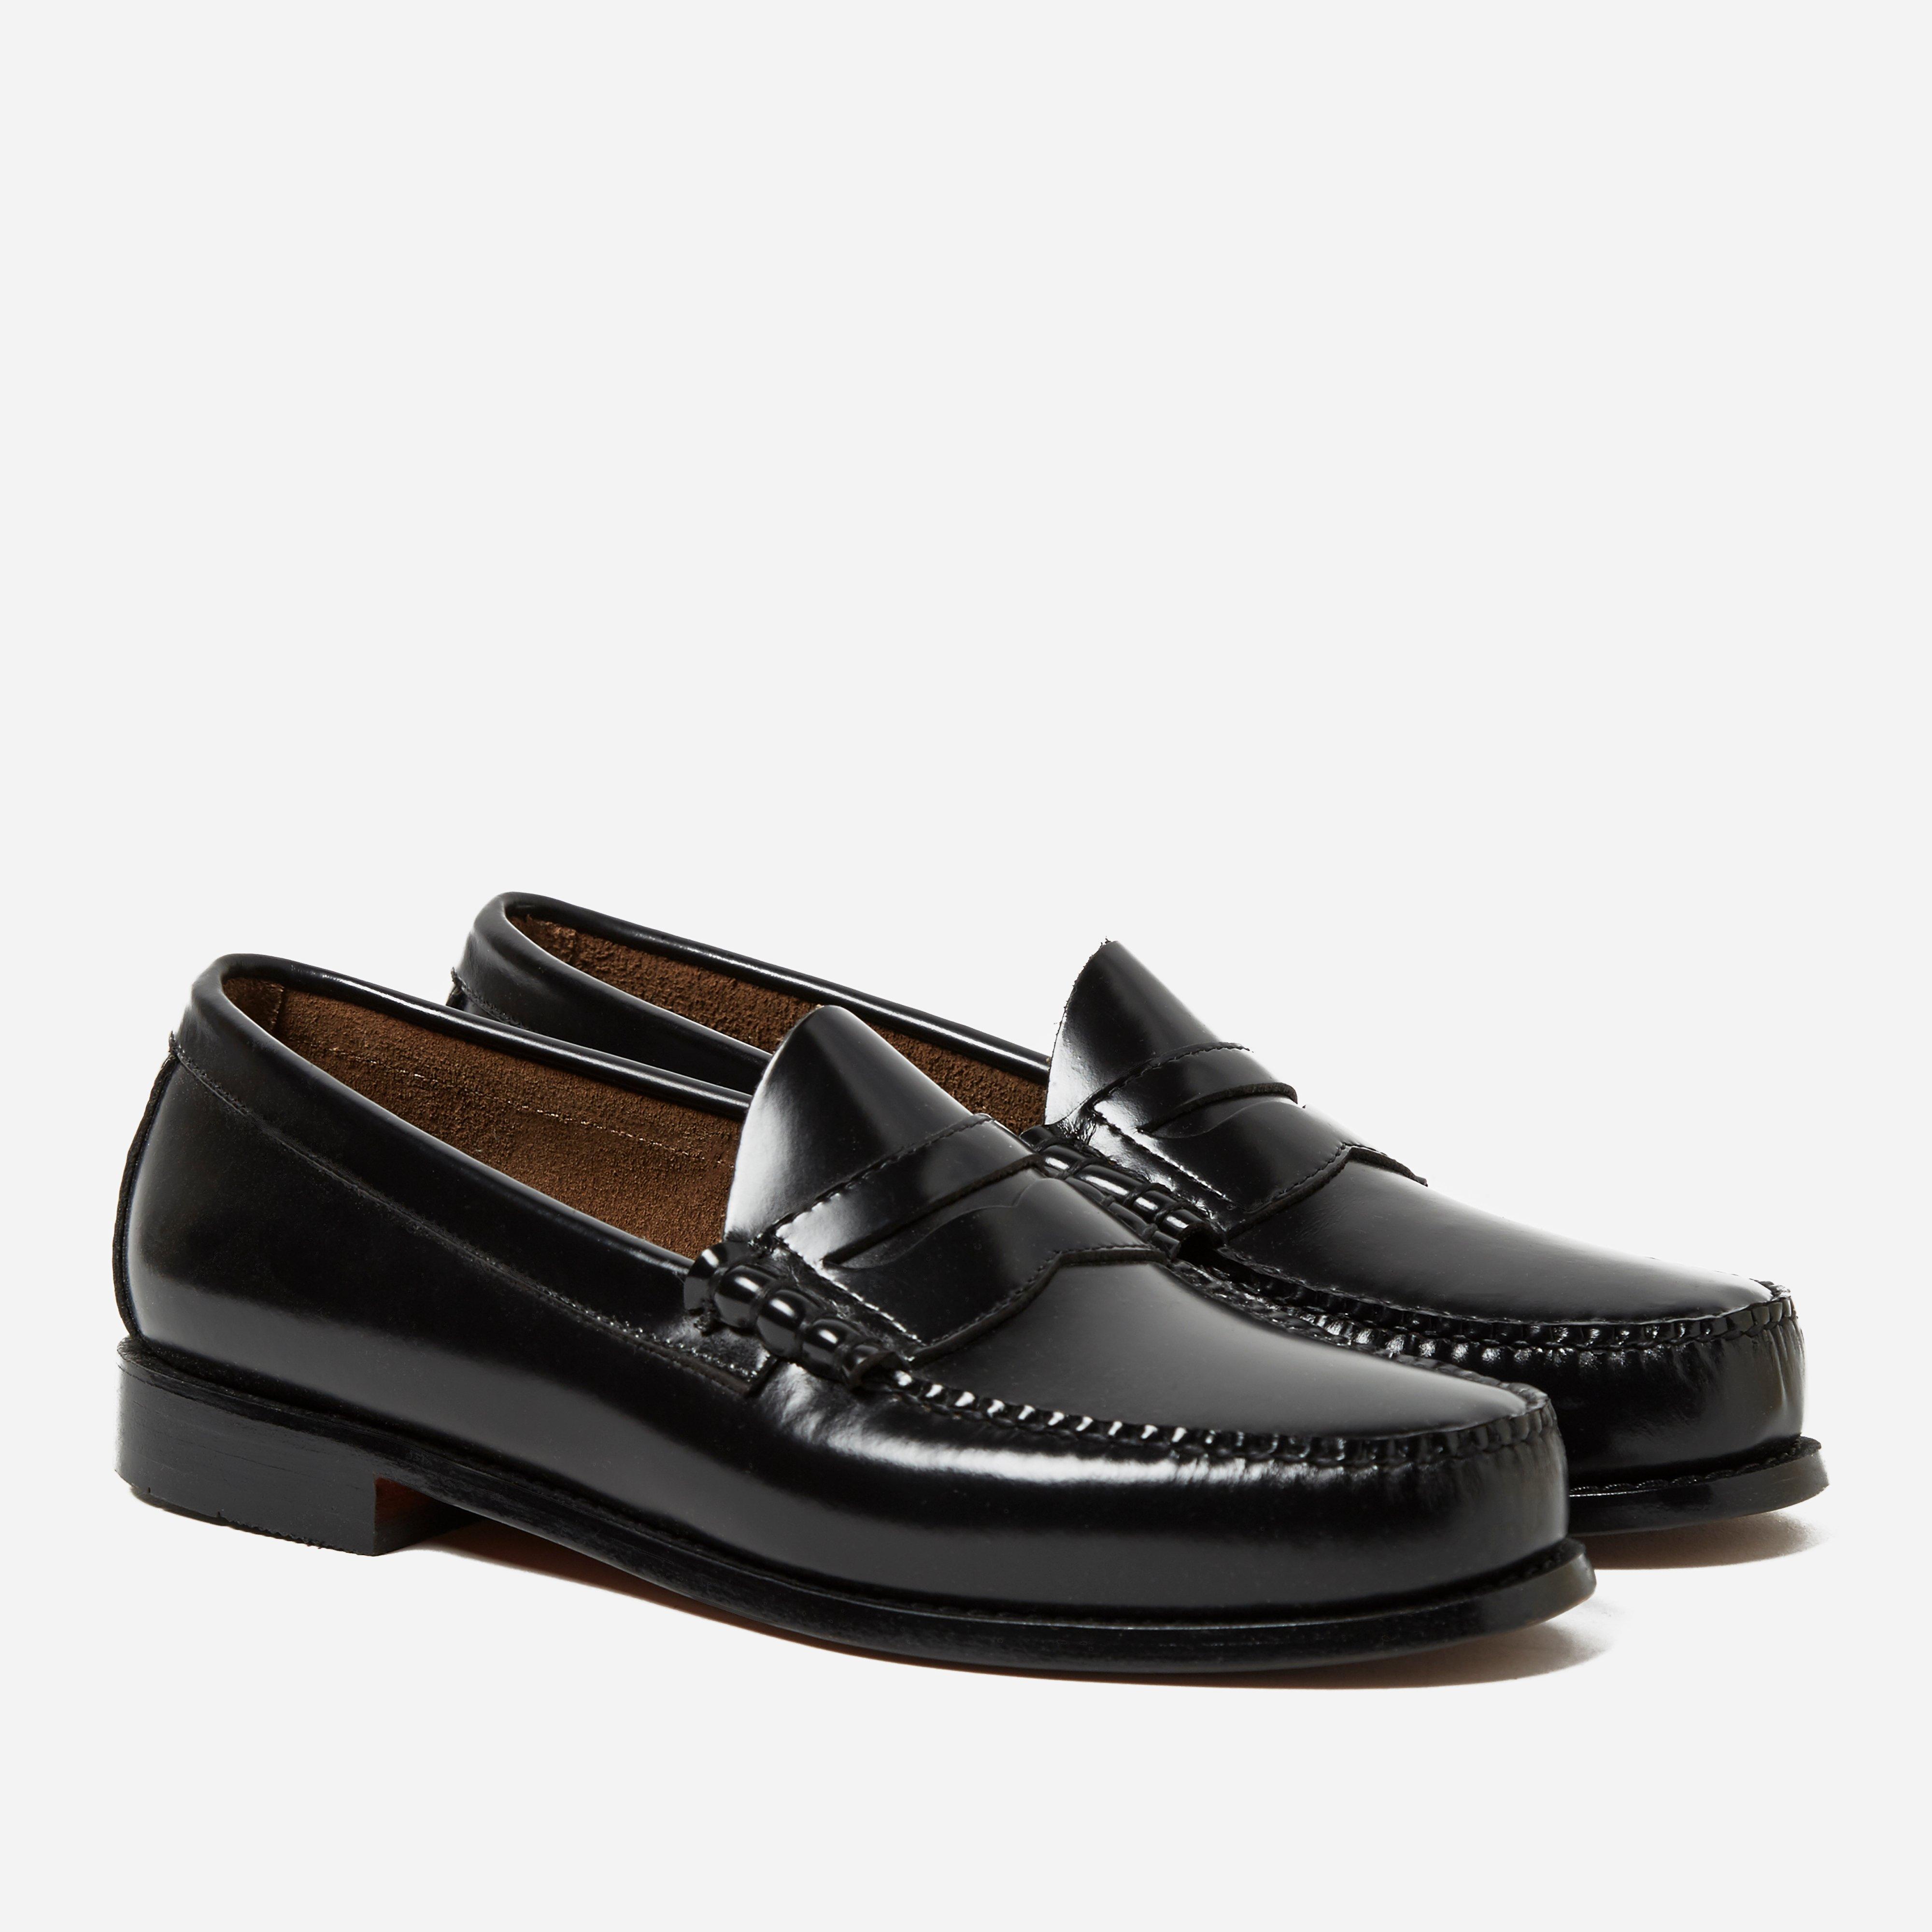 Lyst - G.H. Bass & Co. Bass Weejun Larson Penny Loafer in Black for Men